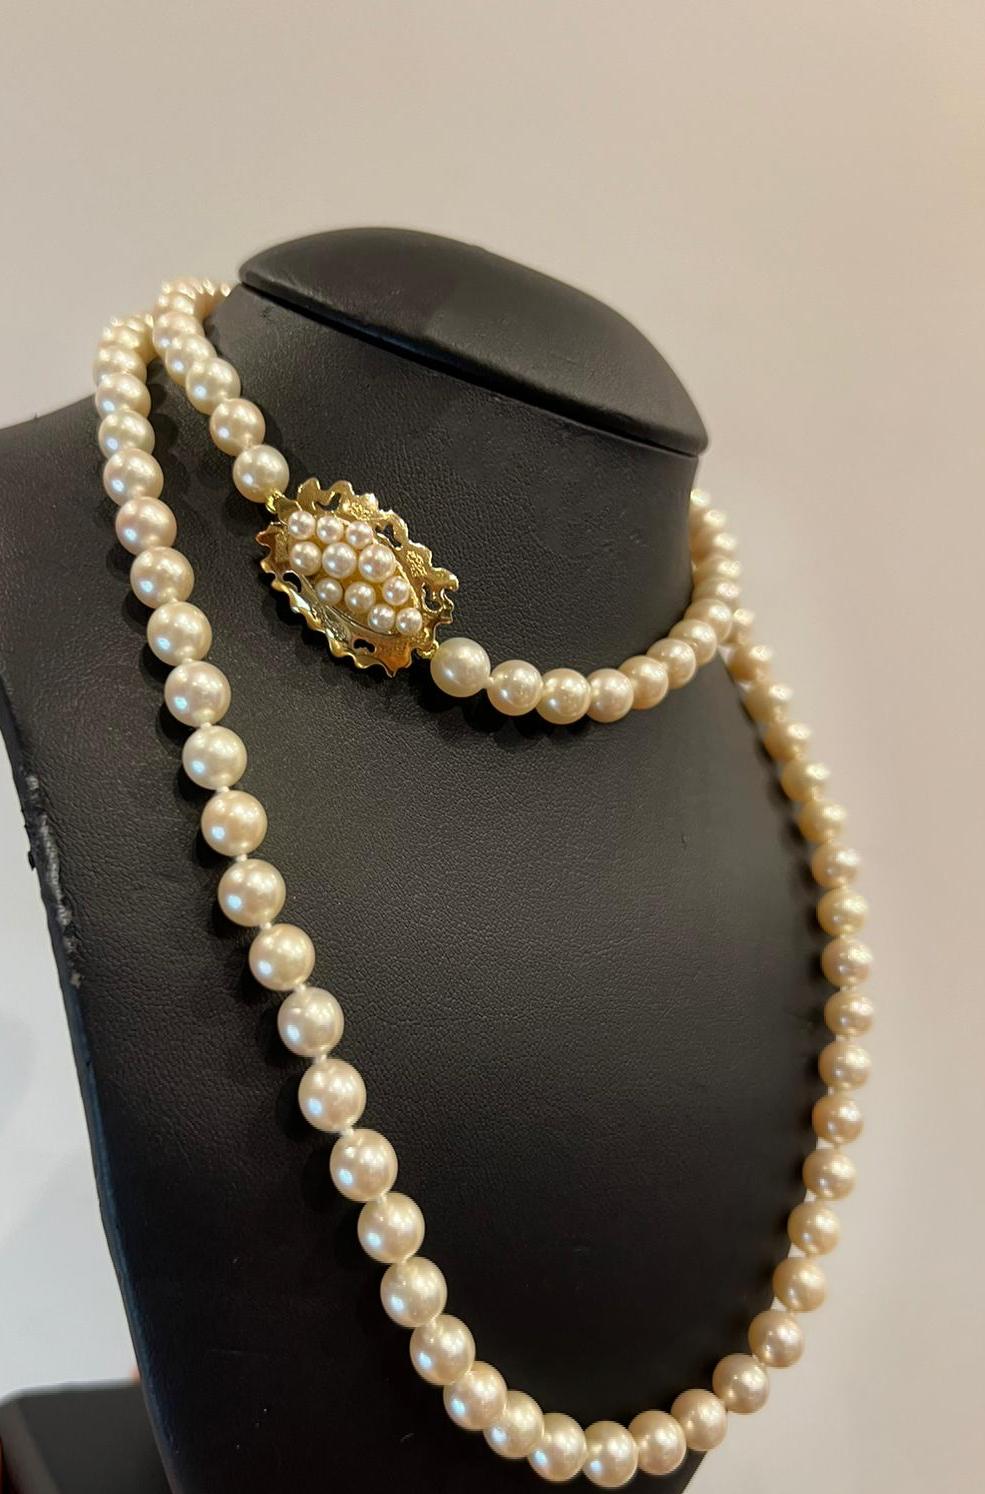 Women's South Sea Pearl Opera Length 78cm (30.7 inches) Necklace 18K Gold & Pearl Clasp For Sale